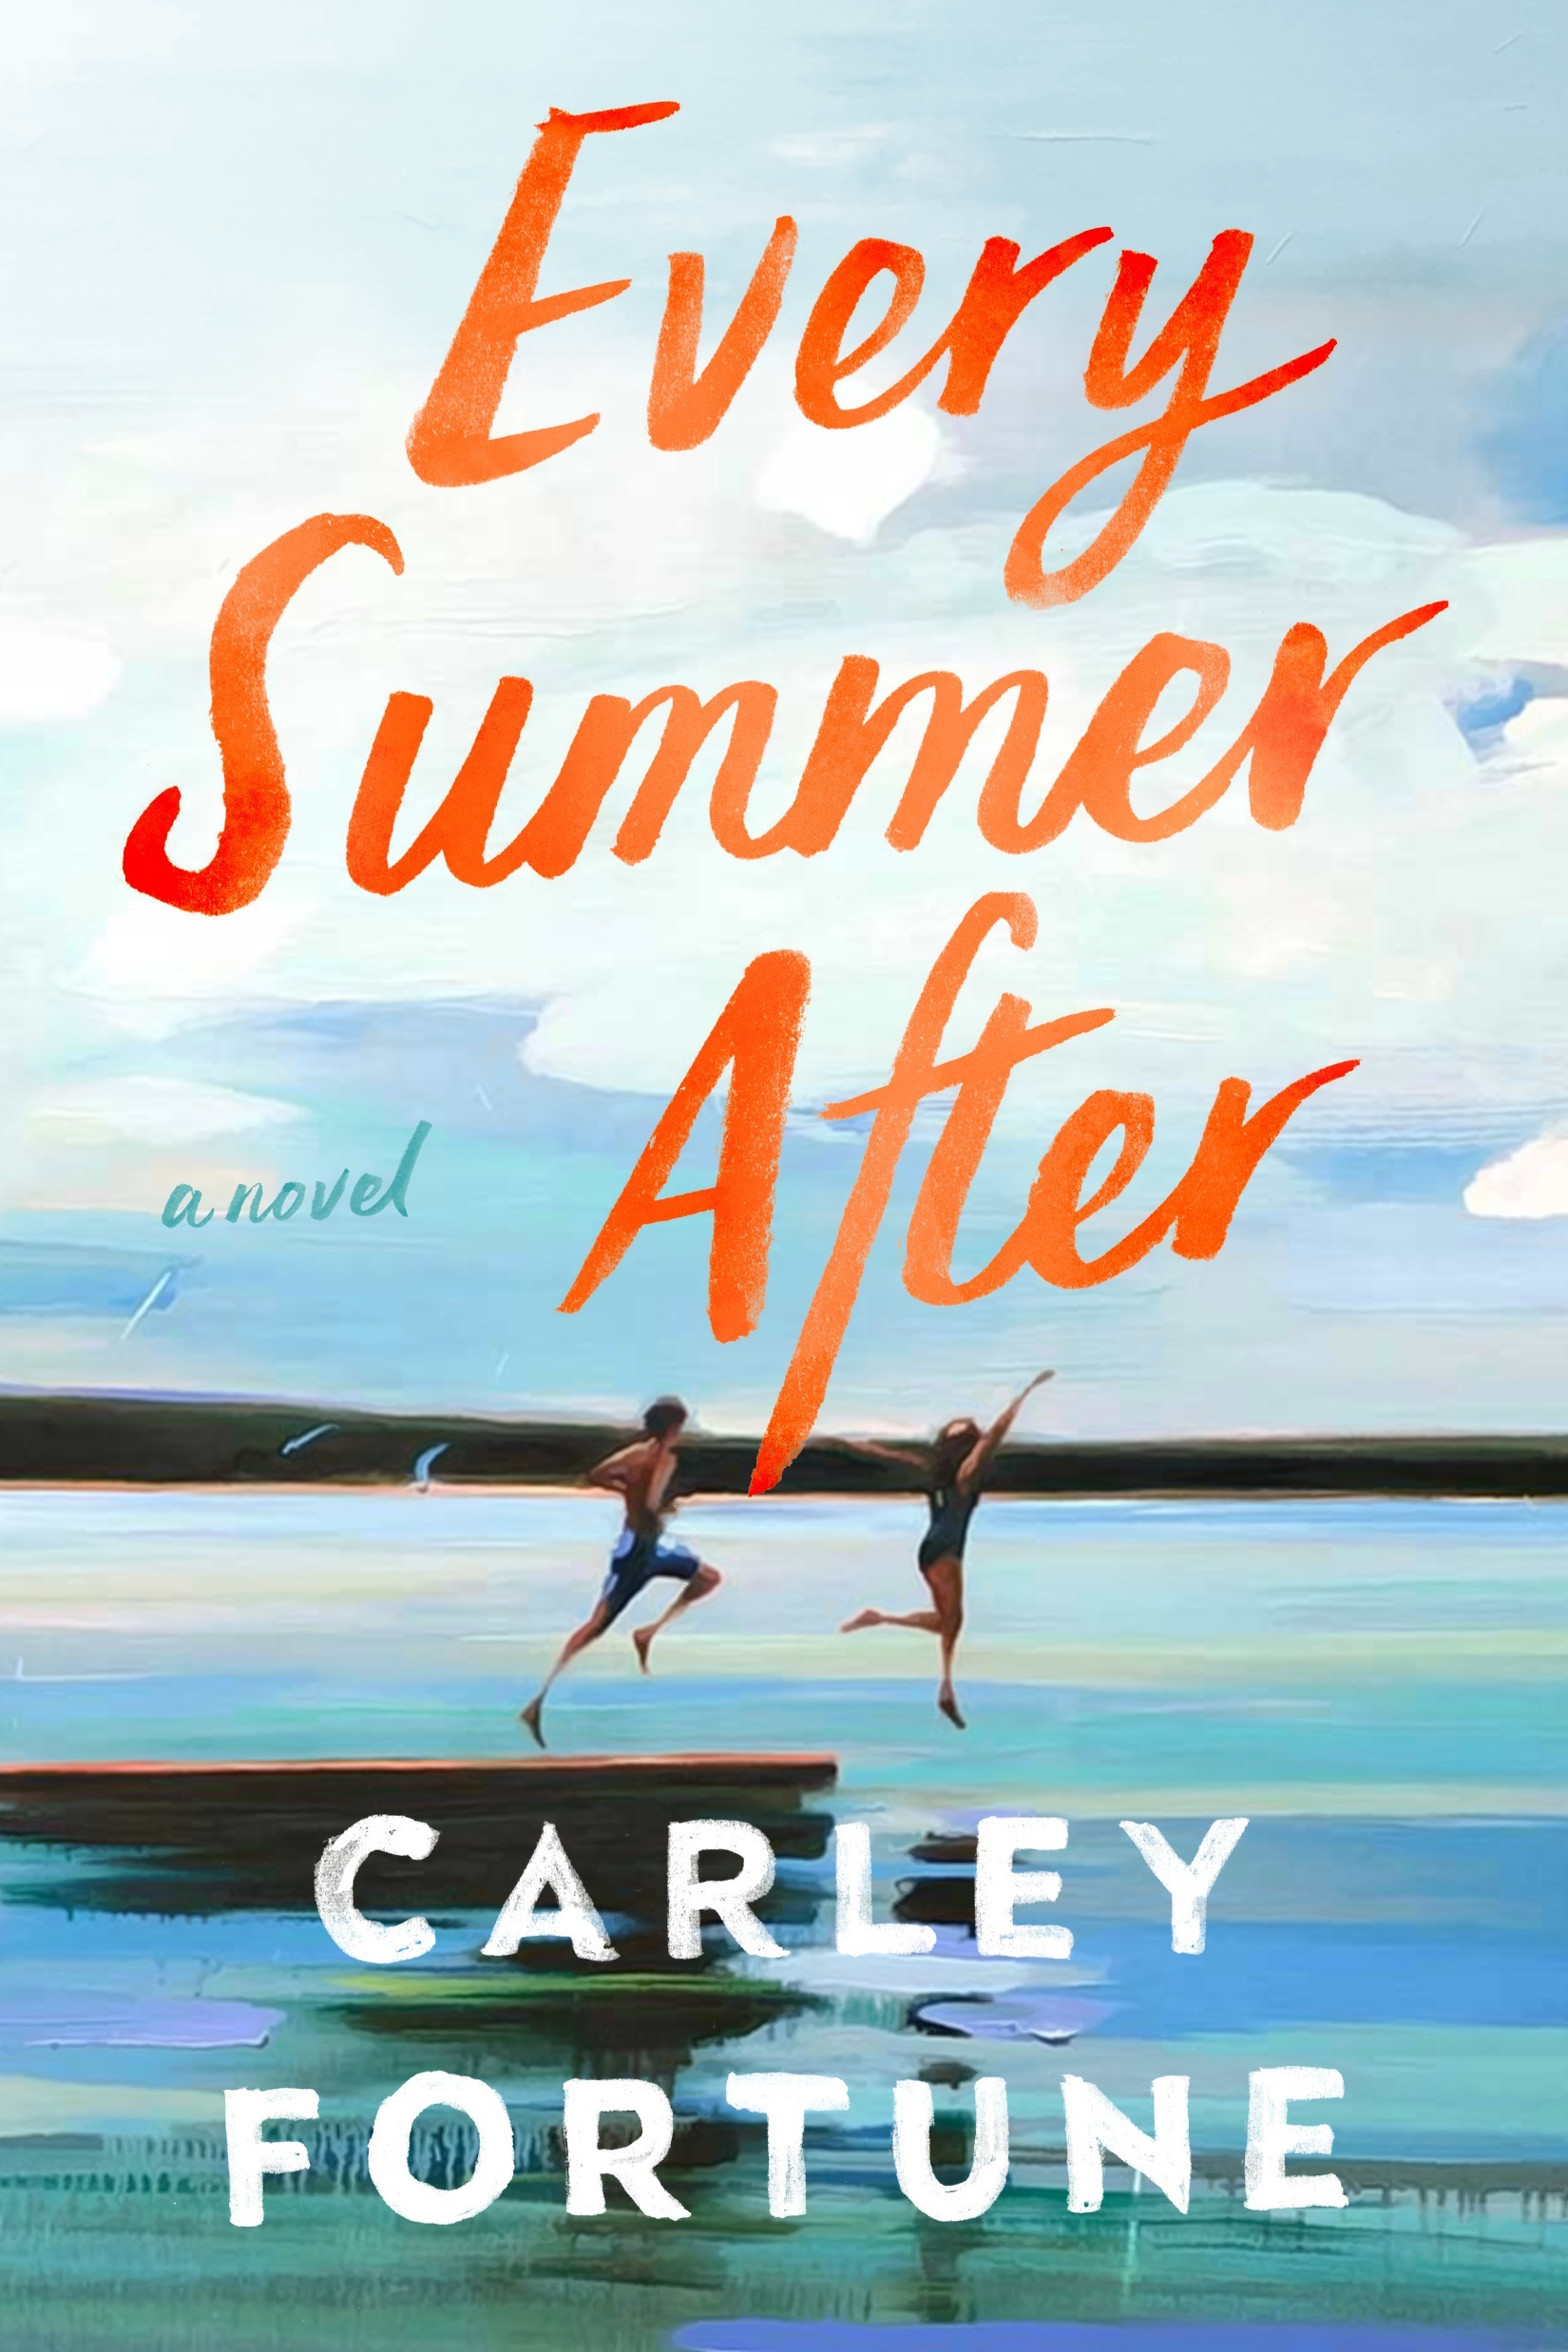 EVERY SUMMER AFTER BY CARLEY FORTYUNE